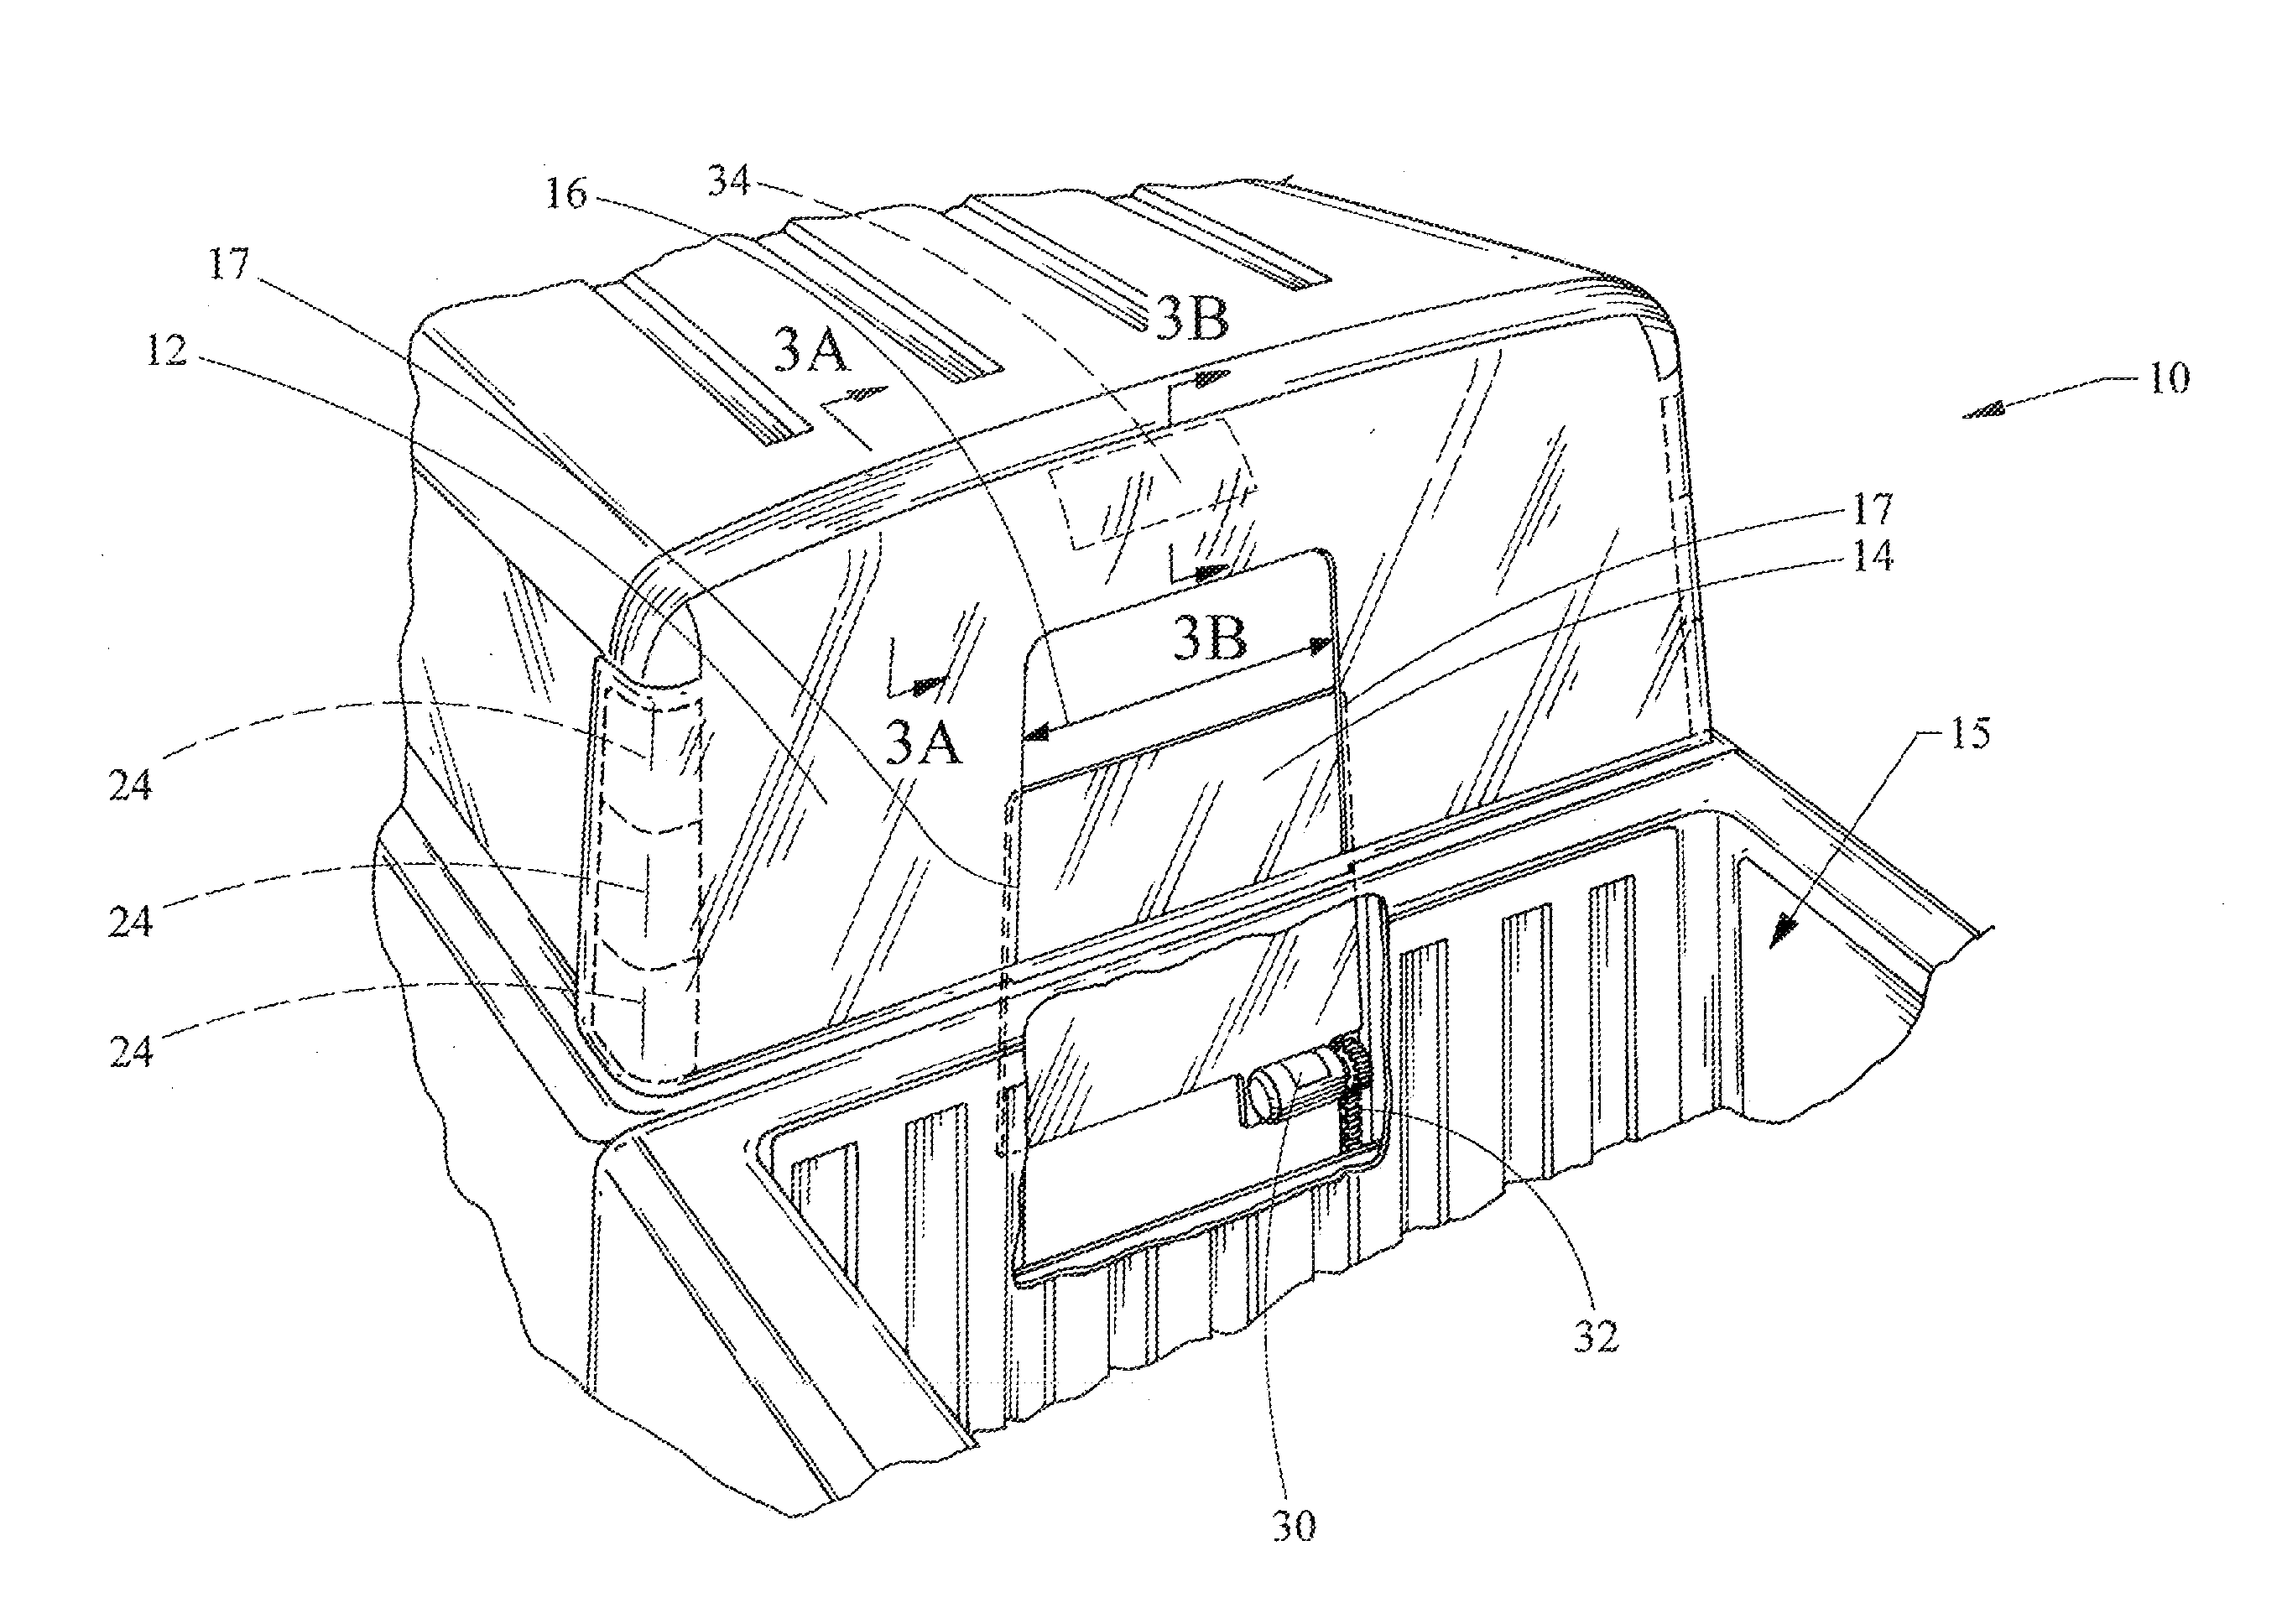 Integrated polycarbonate window assembly